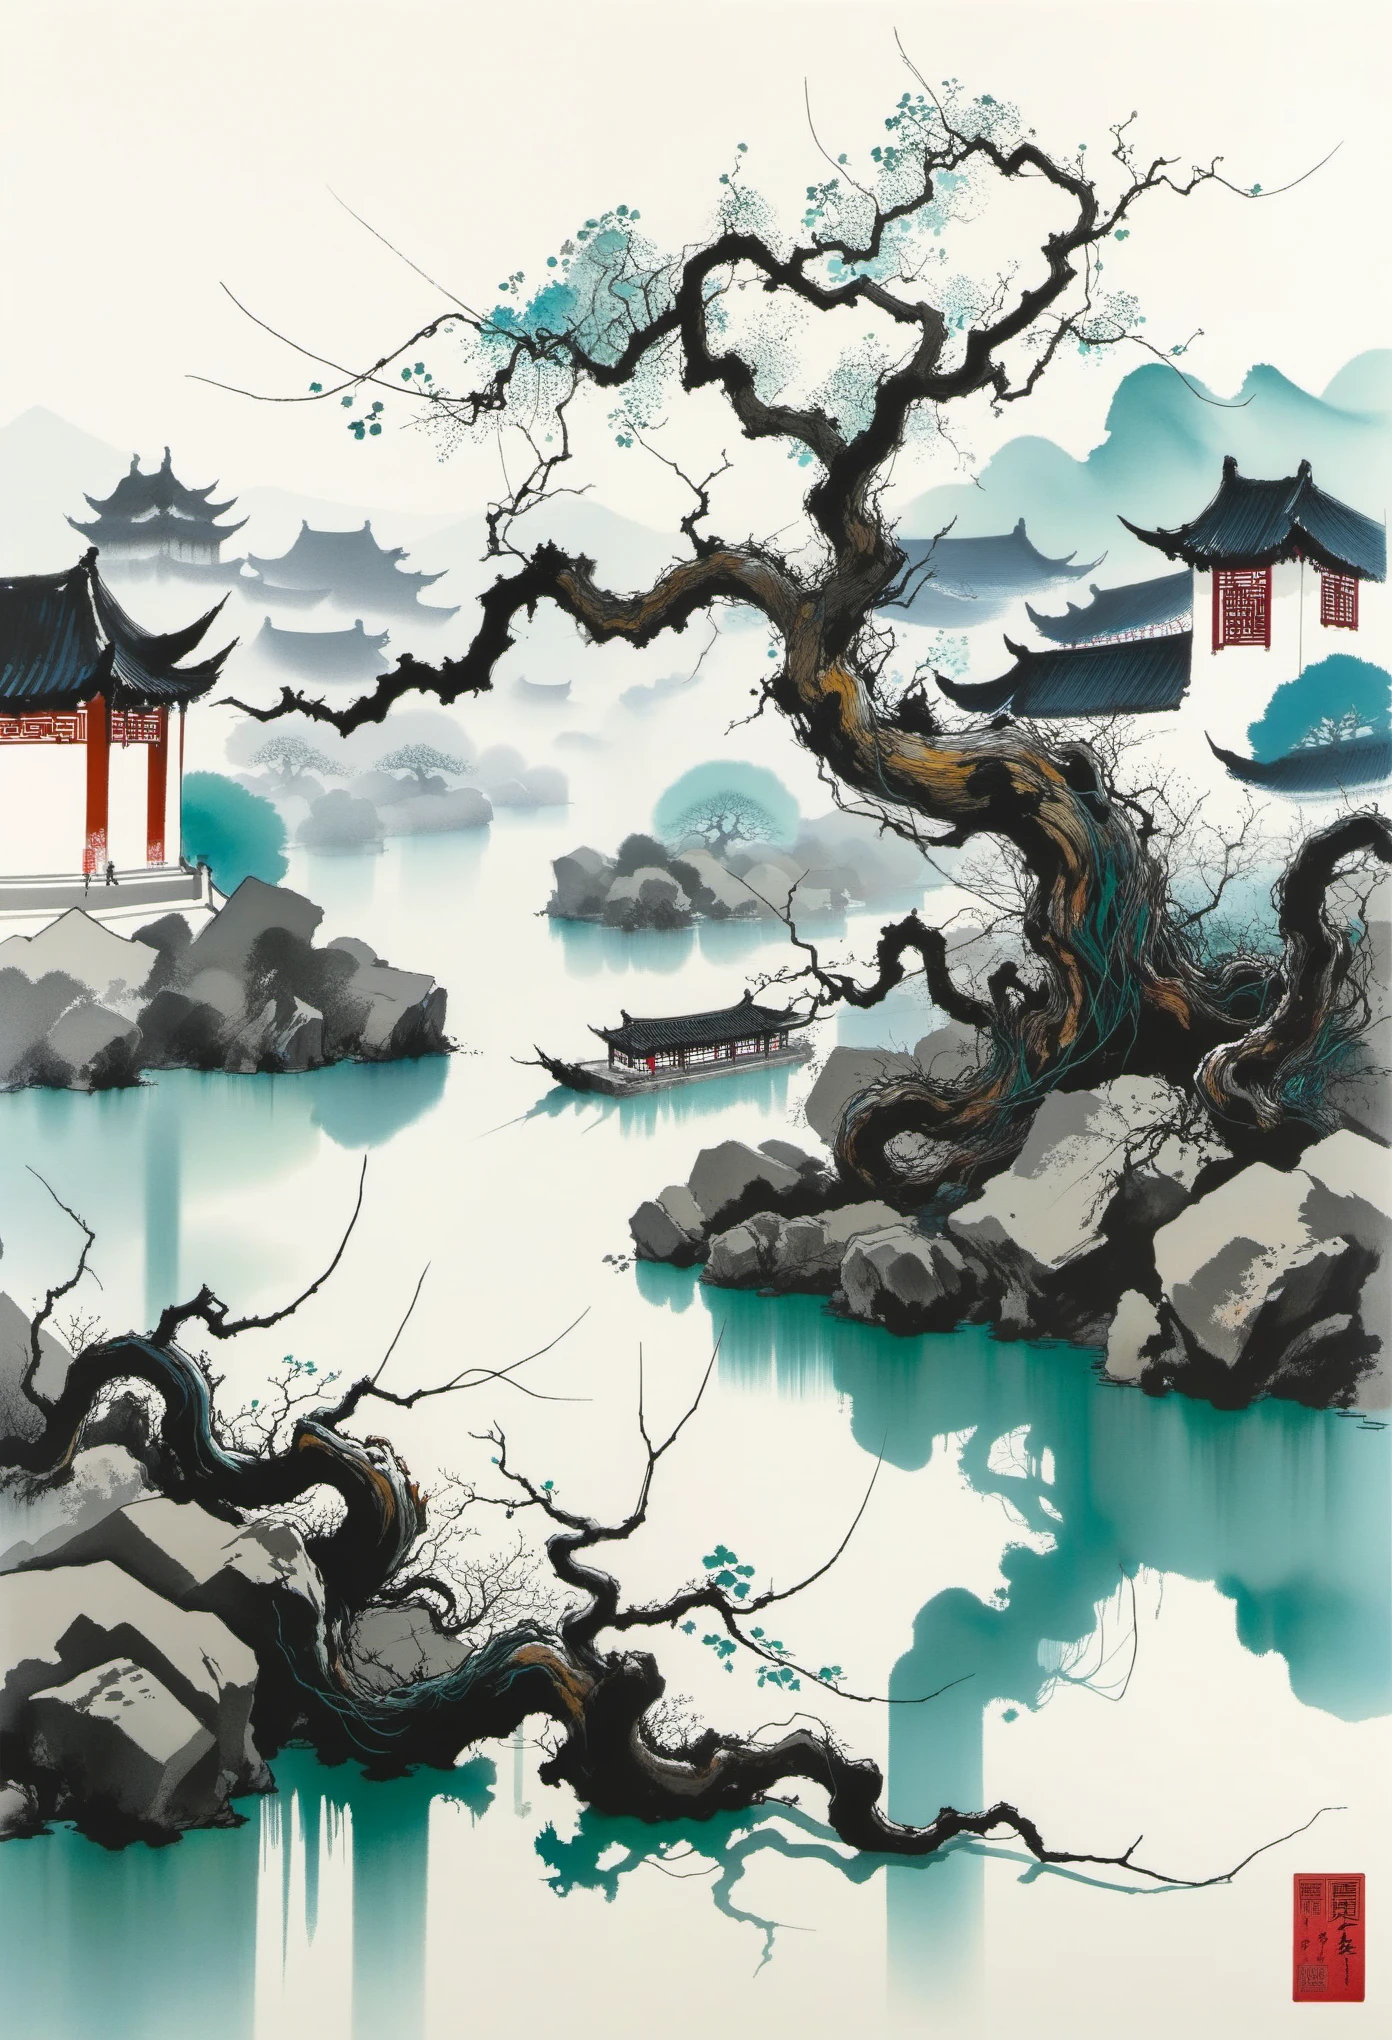 Dead vines，old tree，Xiaoqiao，running water，Geometric abstract ink，Describe the Jiangnan landscape architectural complex，Wu Guanzhong's style is an artistic expression that merges traditional Chinese ink techniques with Western painting concepts. It is characterized by modern interpretations of traditional themes, creating unique visual effects through color and line.